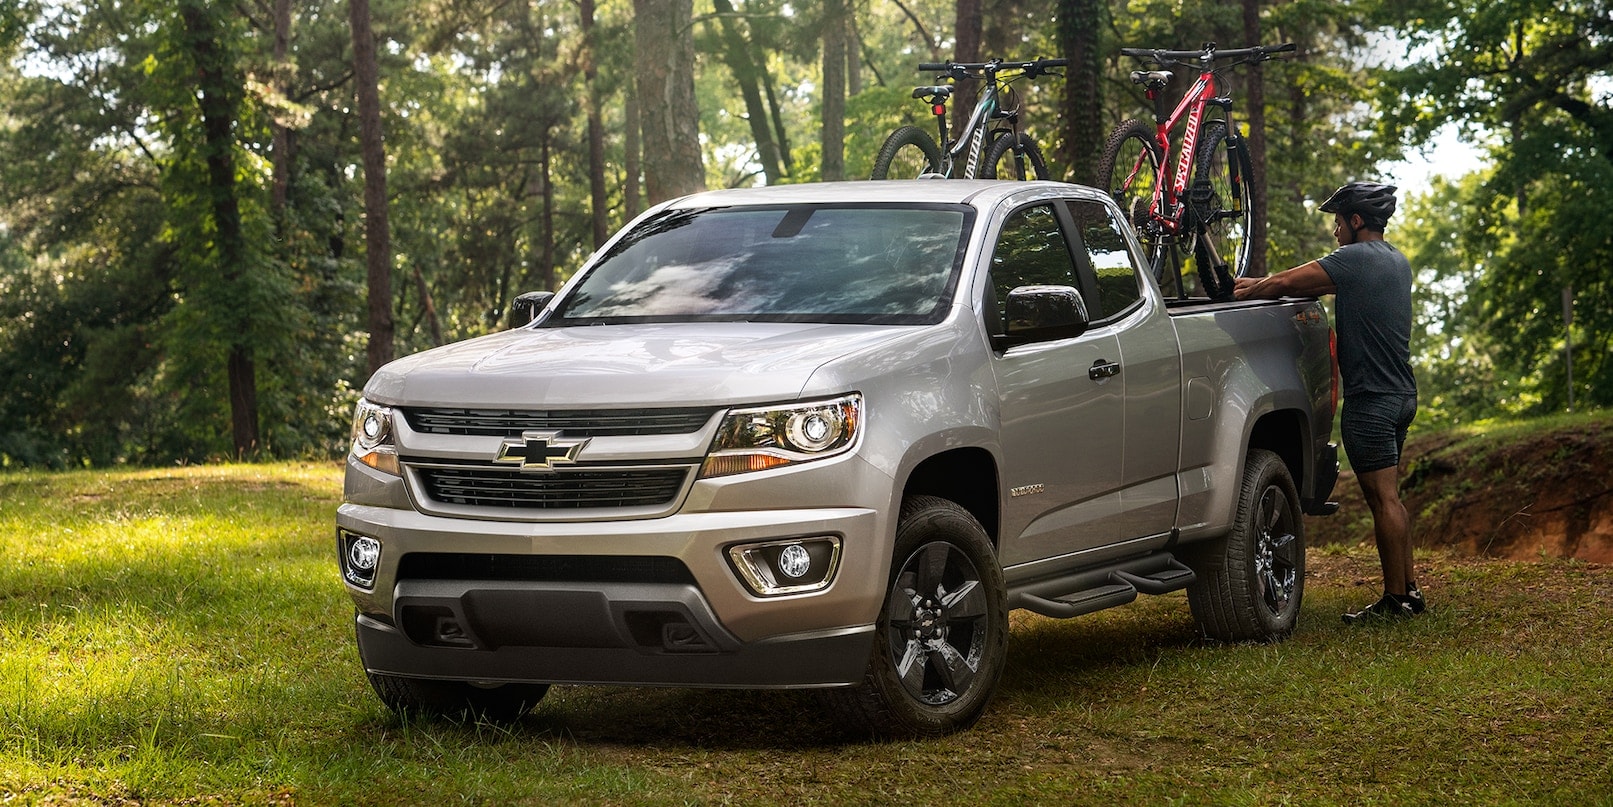 Learn More About The All New 2018 Chevy Colorado Lease Deals Now Available At Muzi